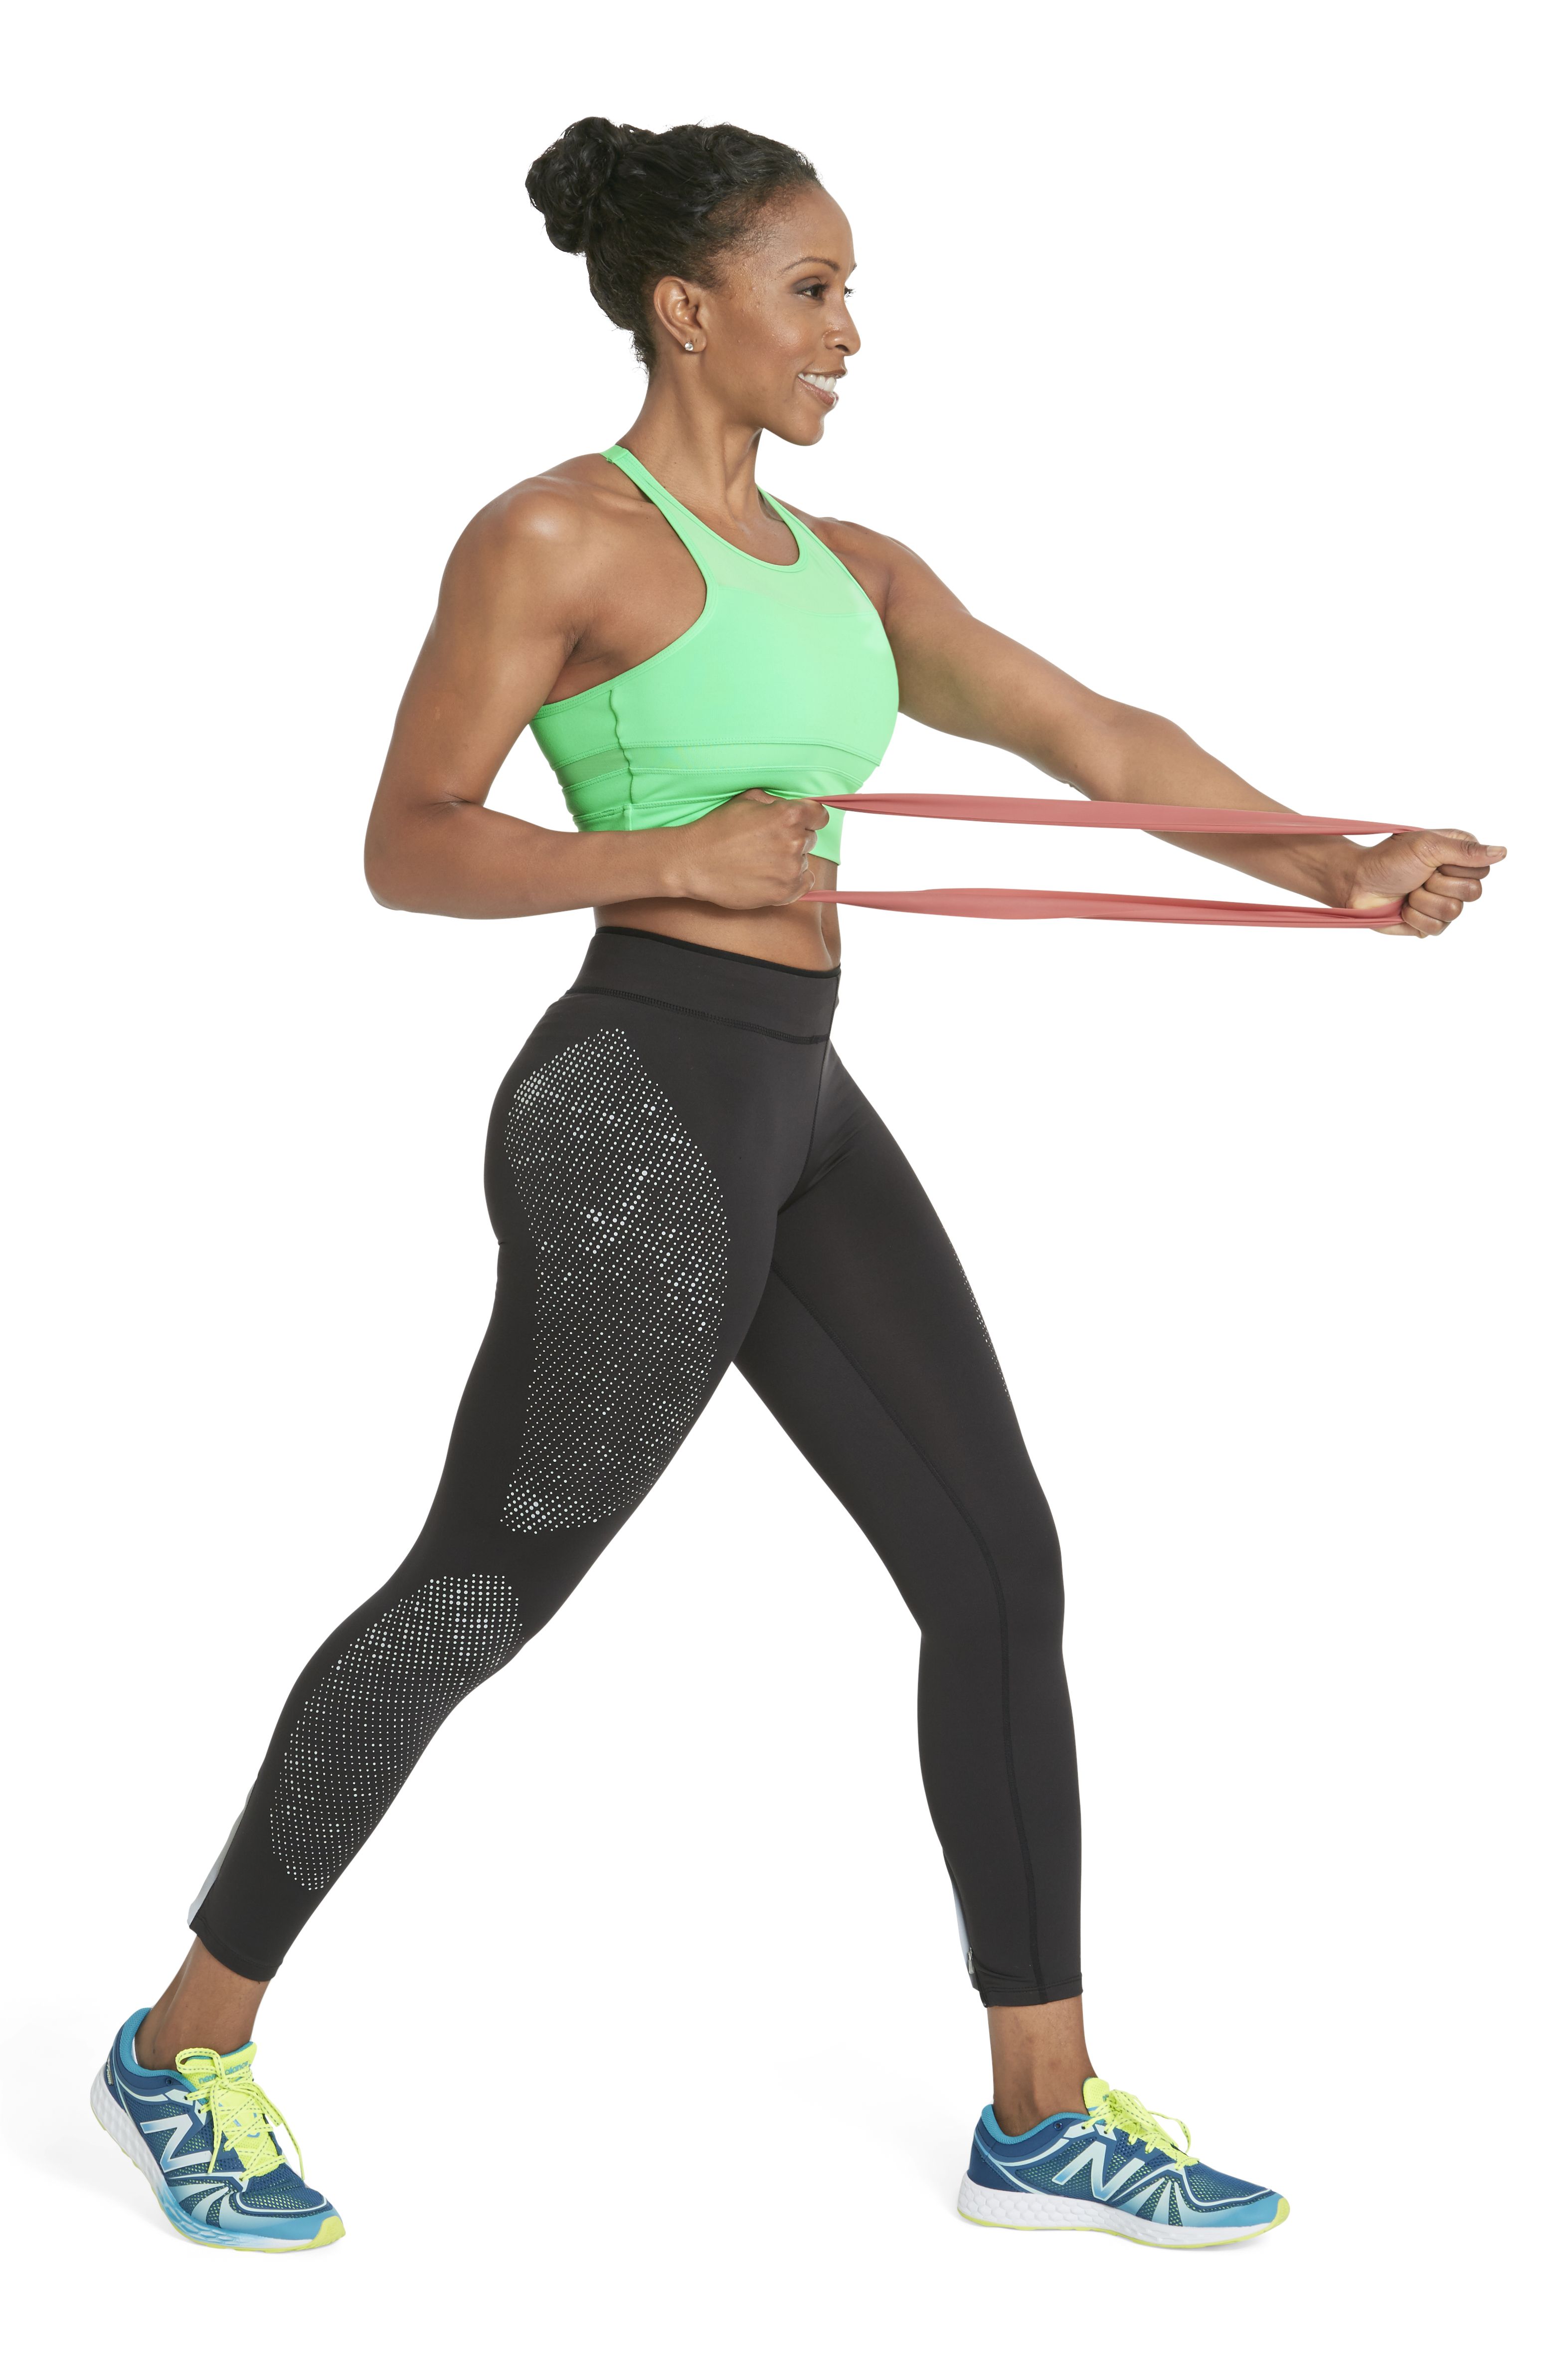 3 Exercises to Tone Back and Bra Bulge - How to a Circular Resistance Band  to Get Rid of Back and Bra Bulge